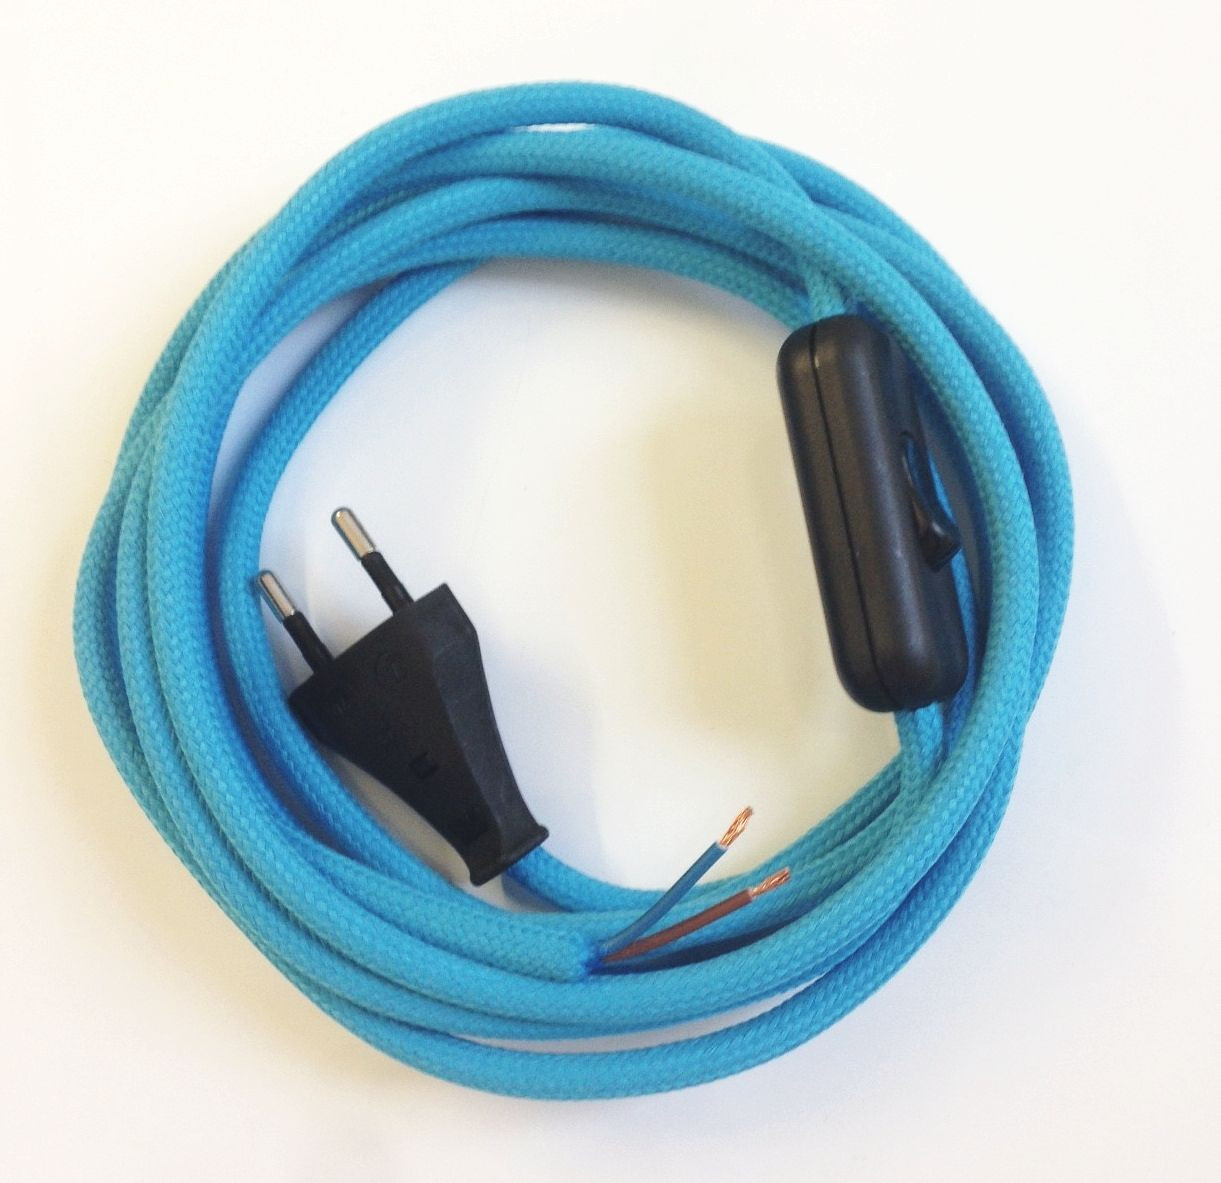 Assembled Supply Cord with Plug and Inline Cord Switch Blue-Turquoise 2 Core 3m